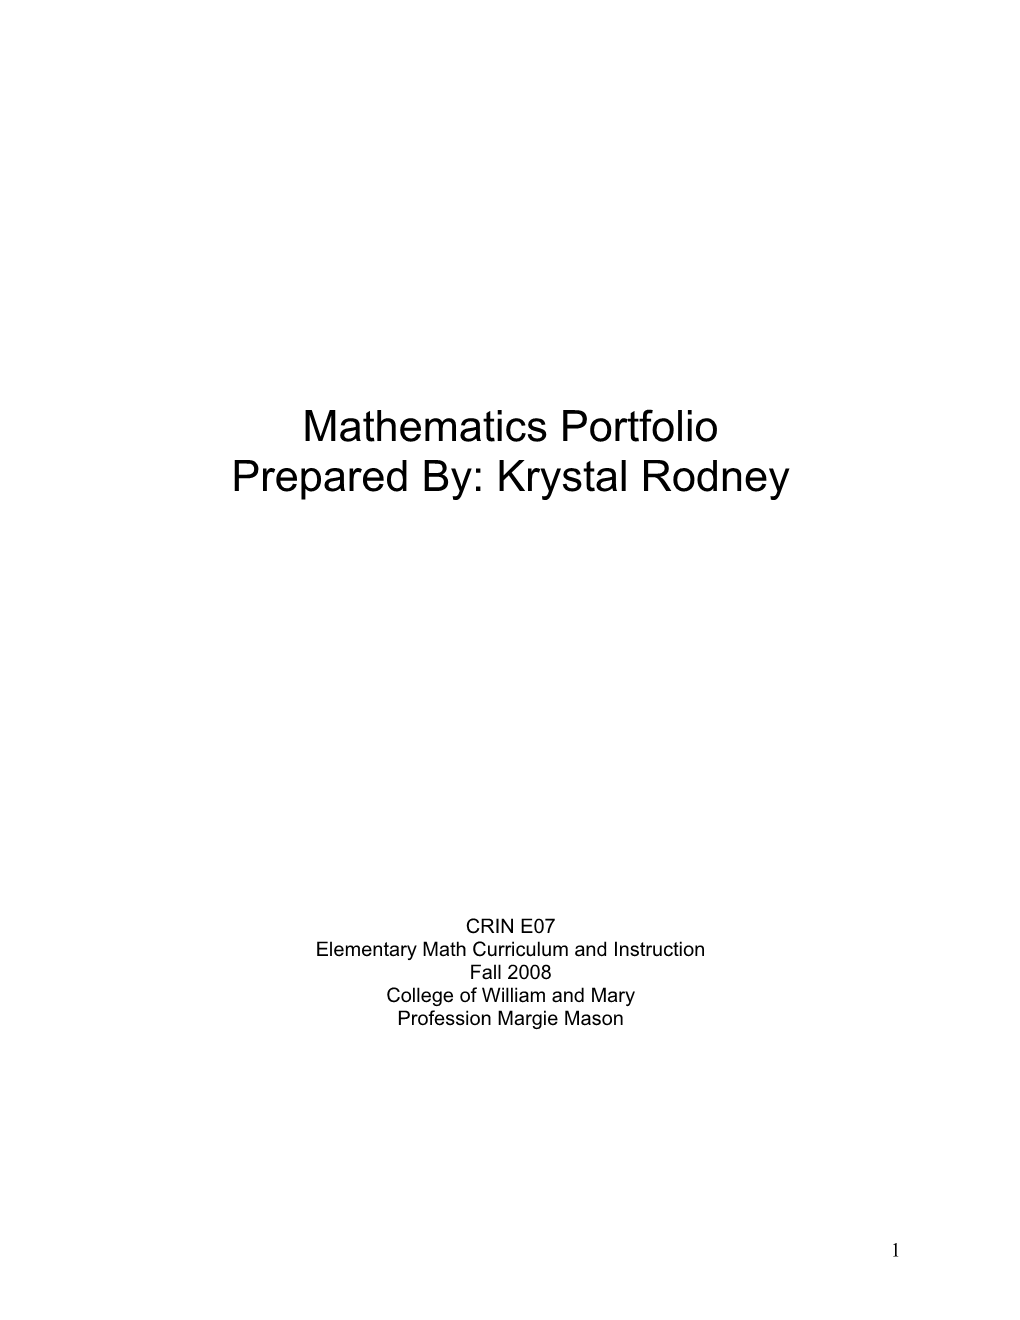 Elementary Math Curriculum and Instruction